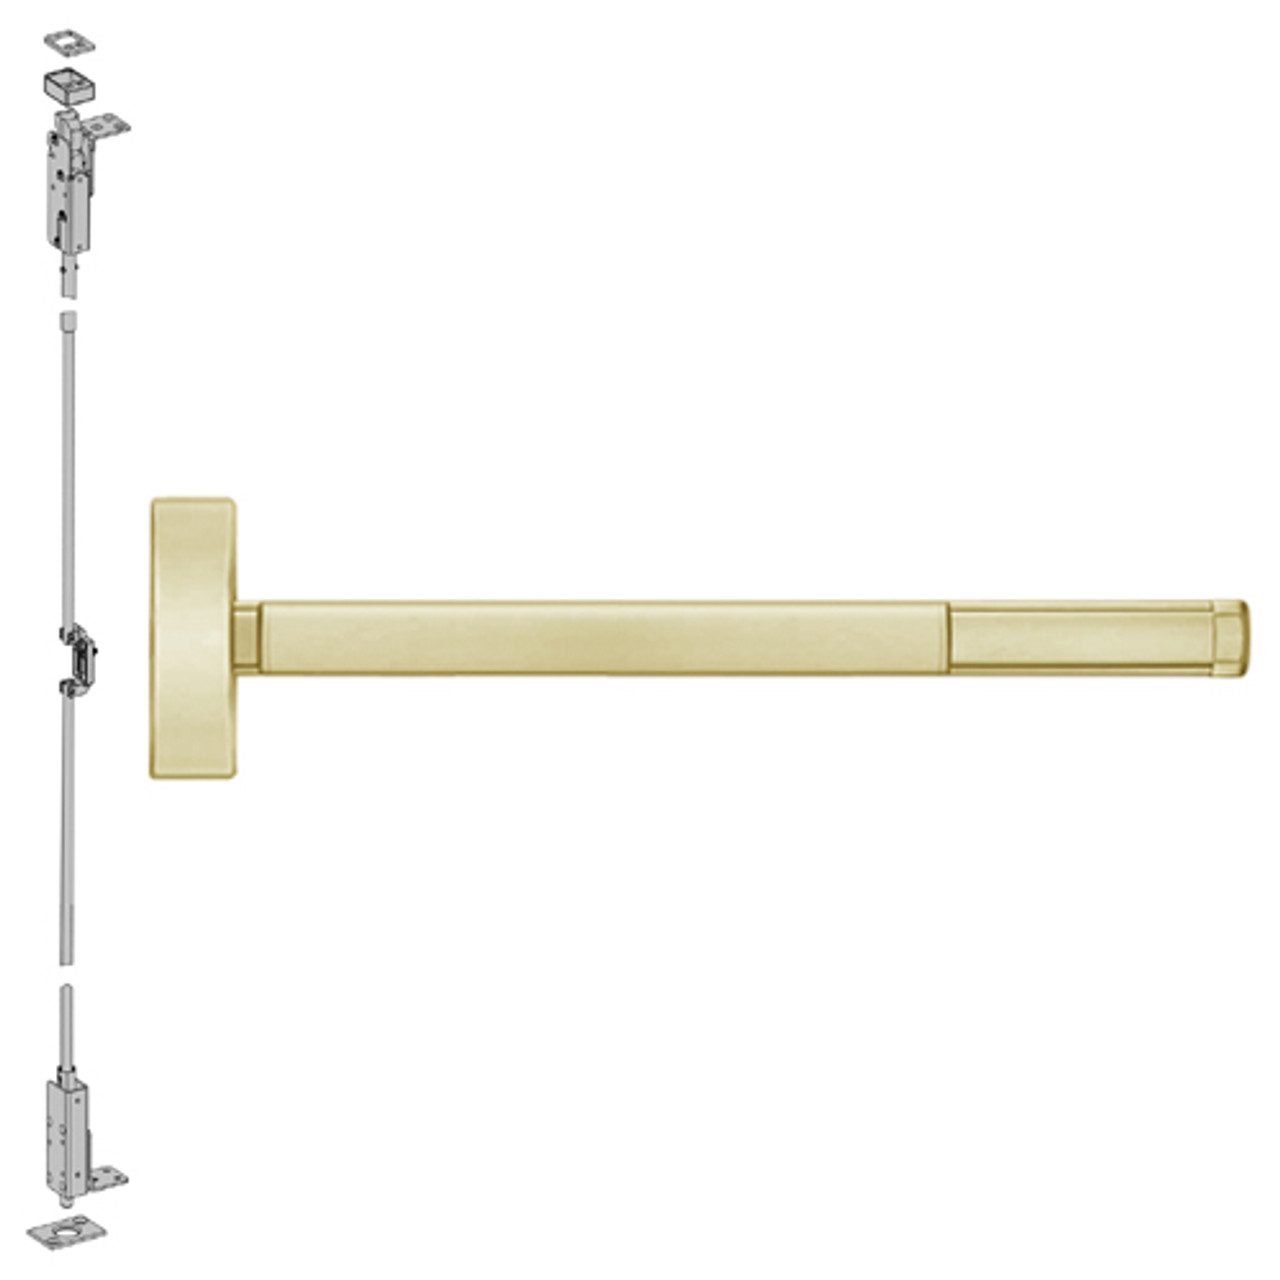 TS2705LBR-606-48 PHI 2700 Series Wood Door Concealed Vertical Exit Device with Touchbar Monitoring Switch Prepped for Key Controls Thumb Piece in Satin Brass Finish